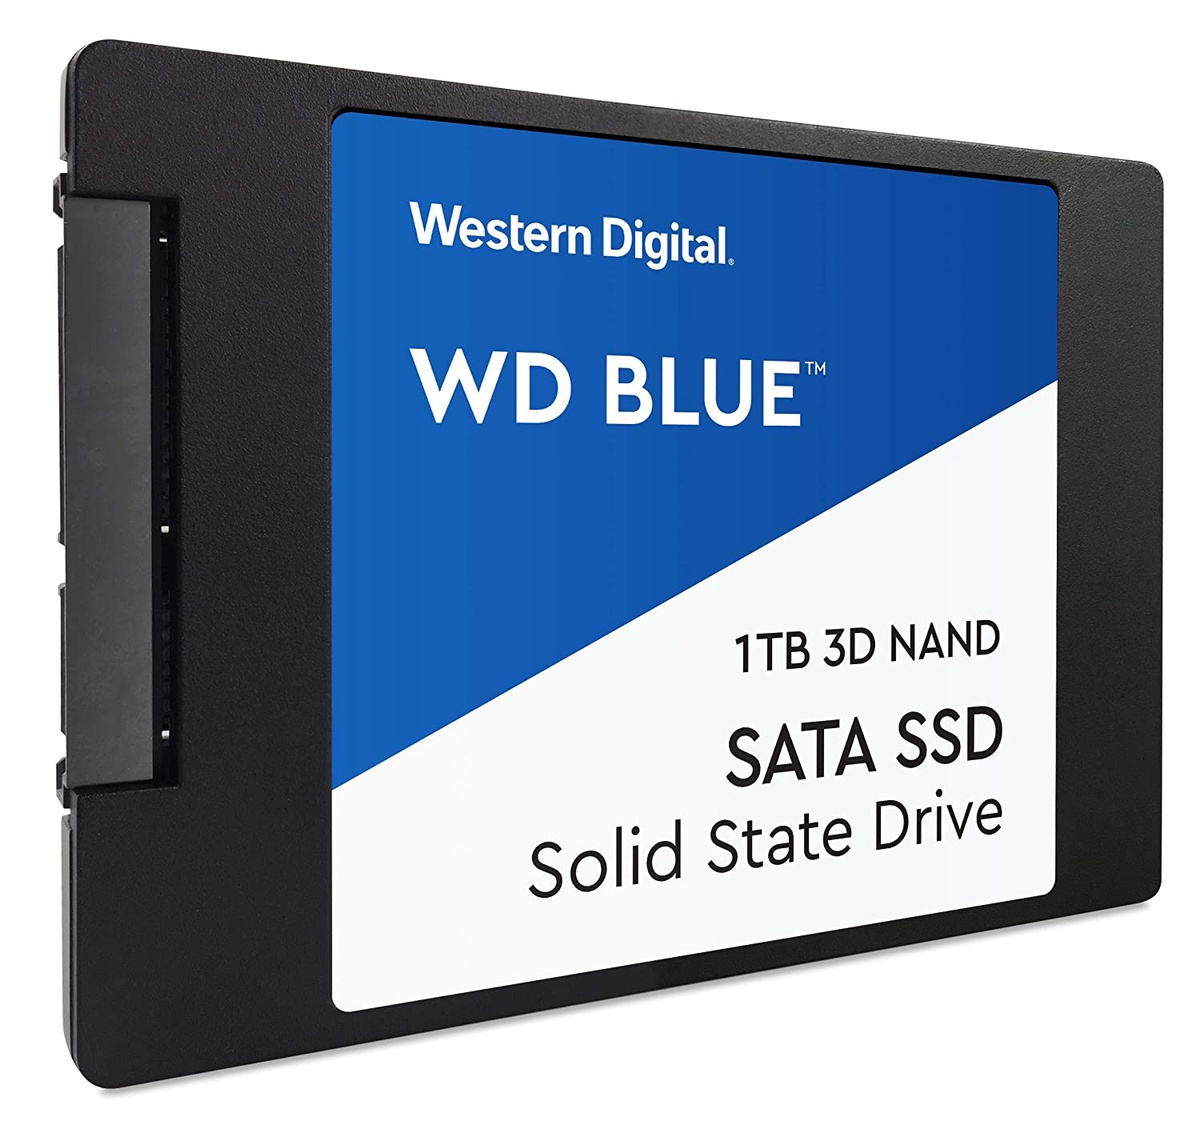 Do Solid State Drives Fail More Often Than Hard Disks?